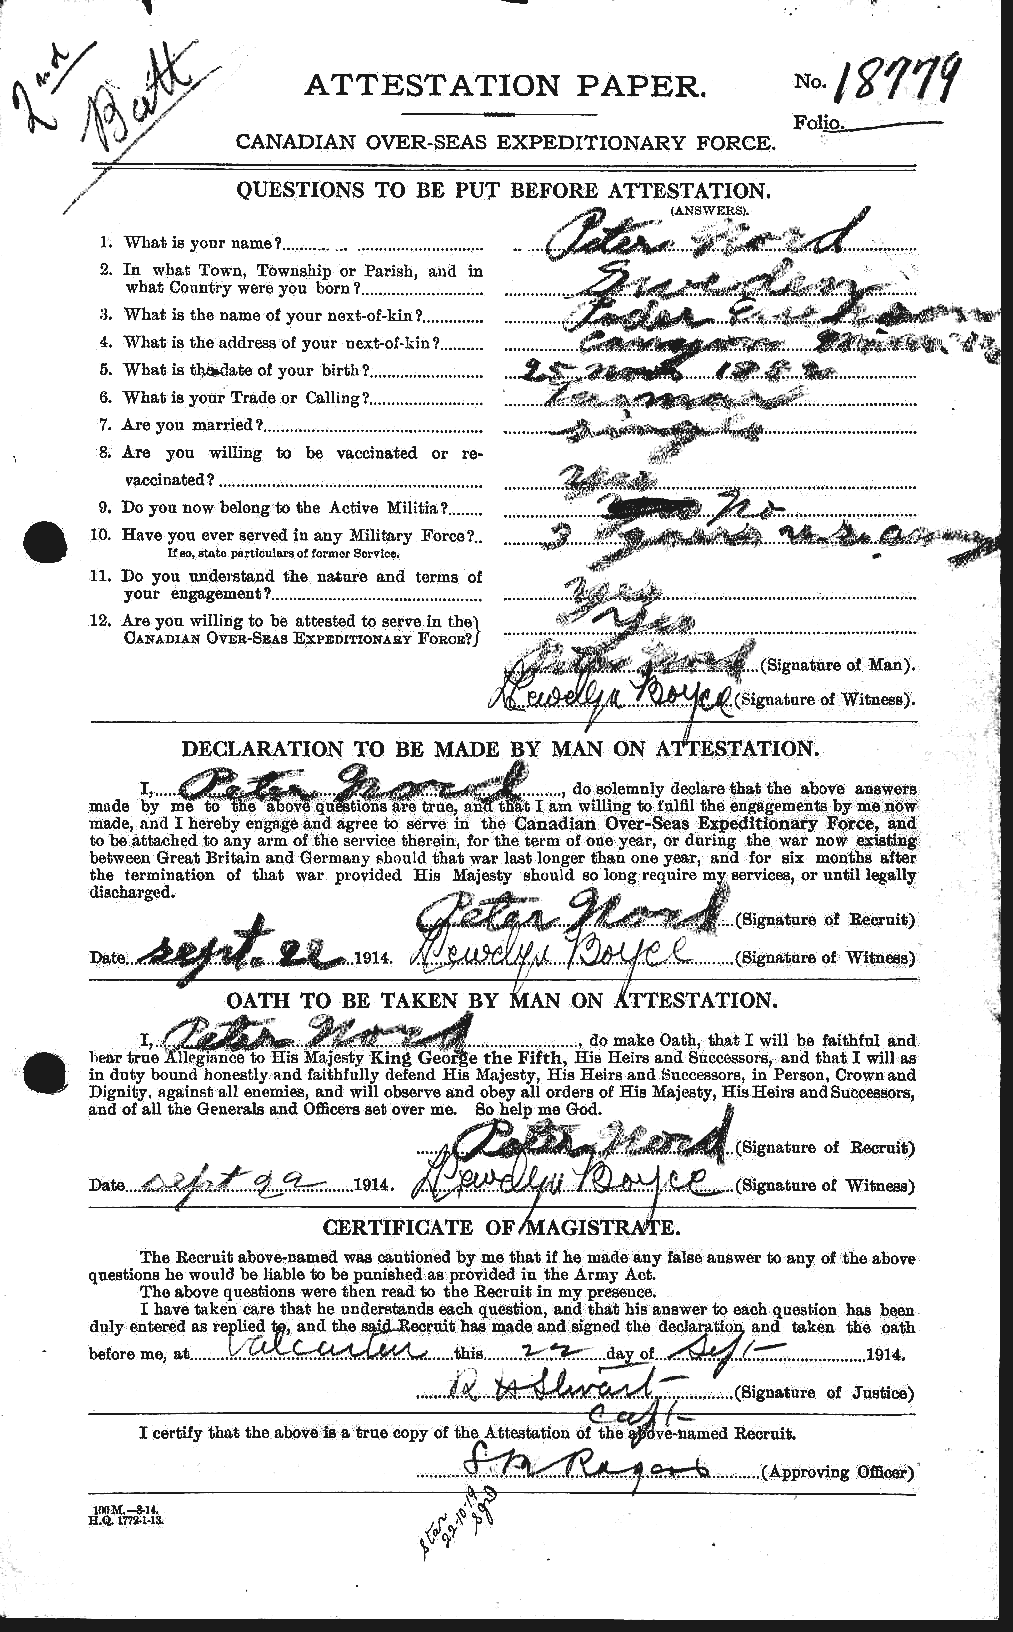 Personnel Records of the First World War - CEF 550197a